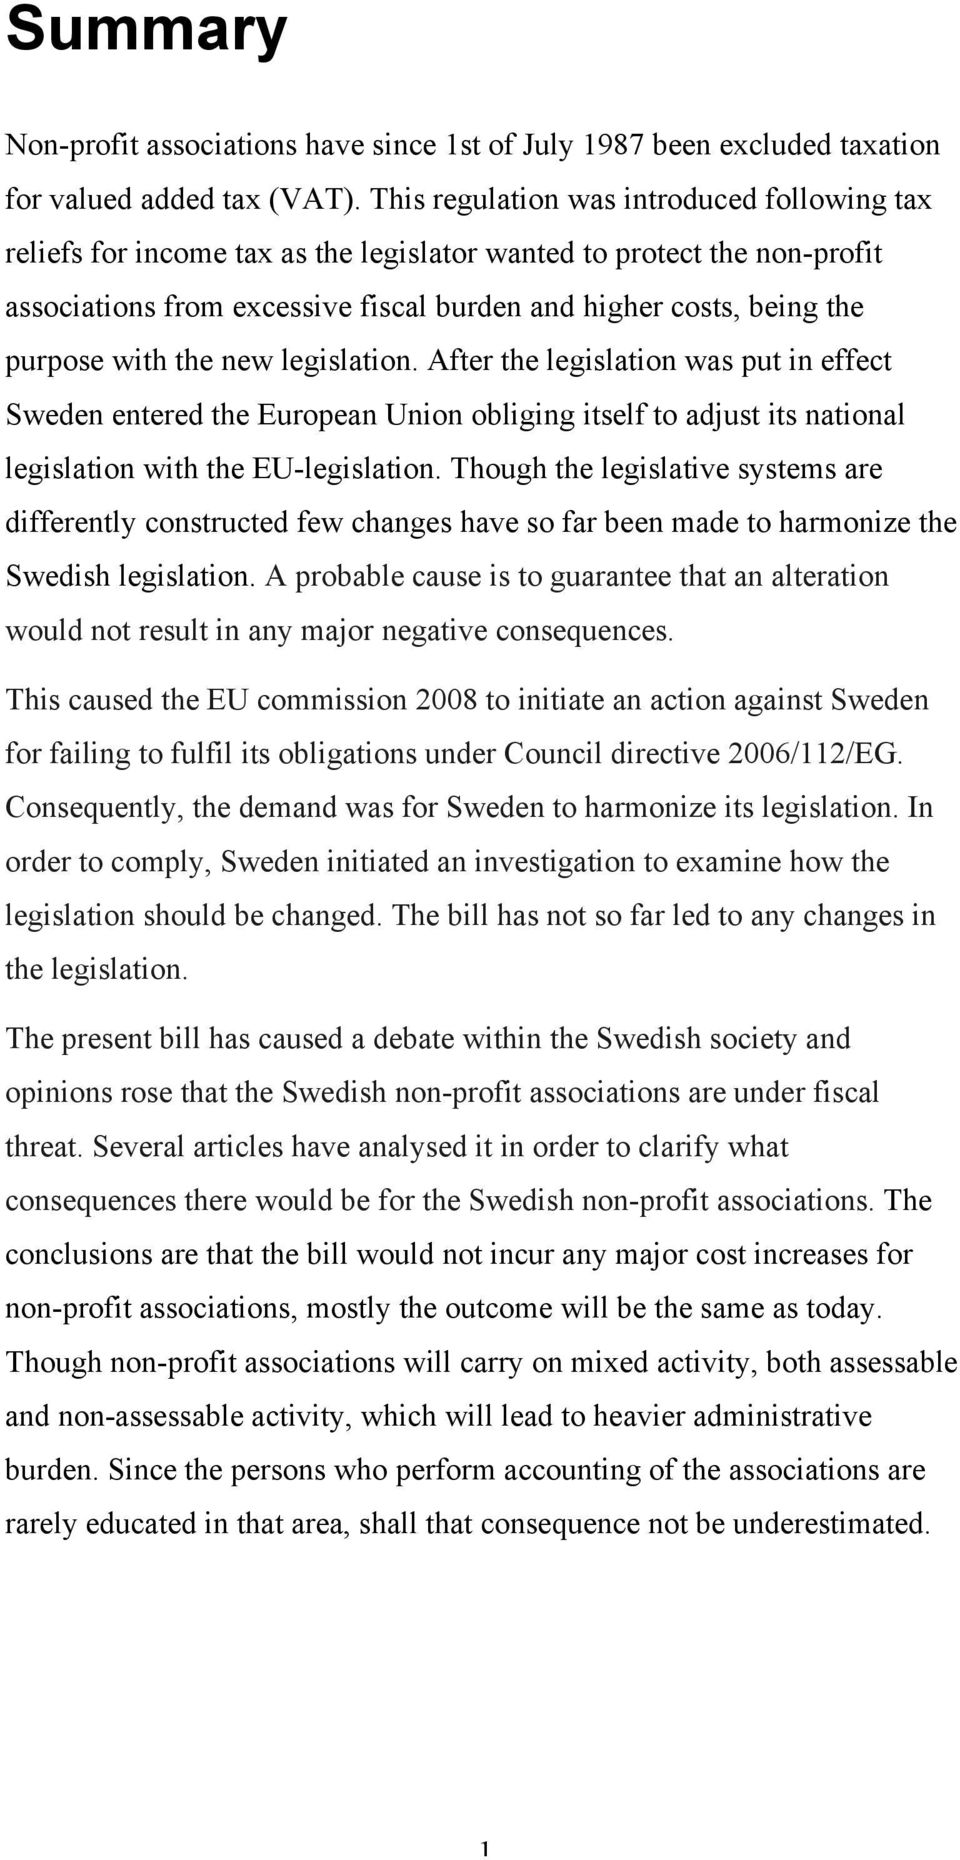 with the new legislation. After the legislation was put in effect Sweden entered the European Union obliging itself to adjust its national legislation with the EU-legislation.